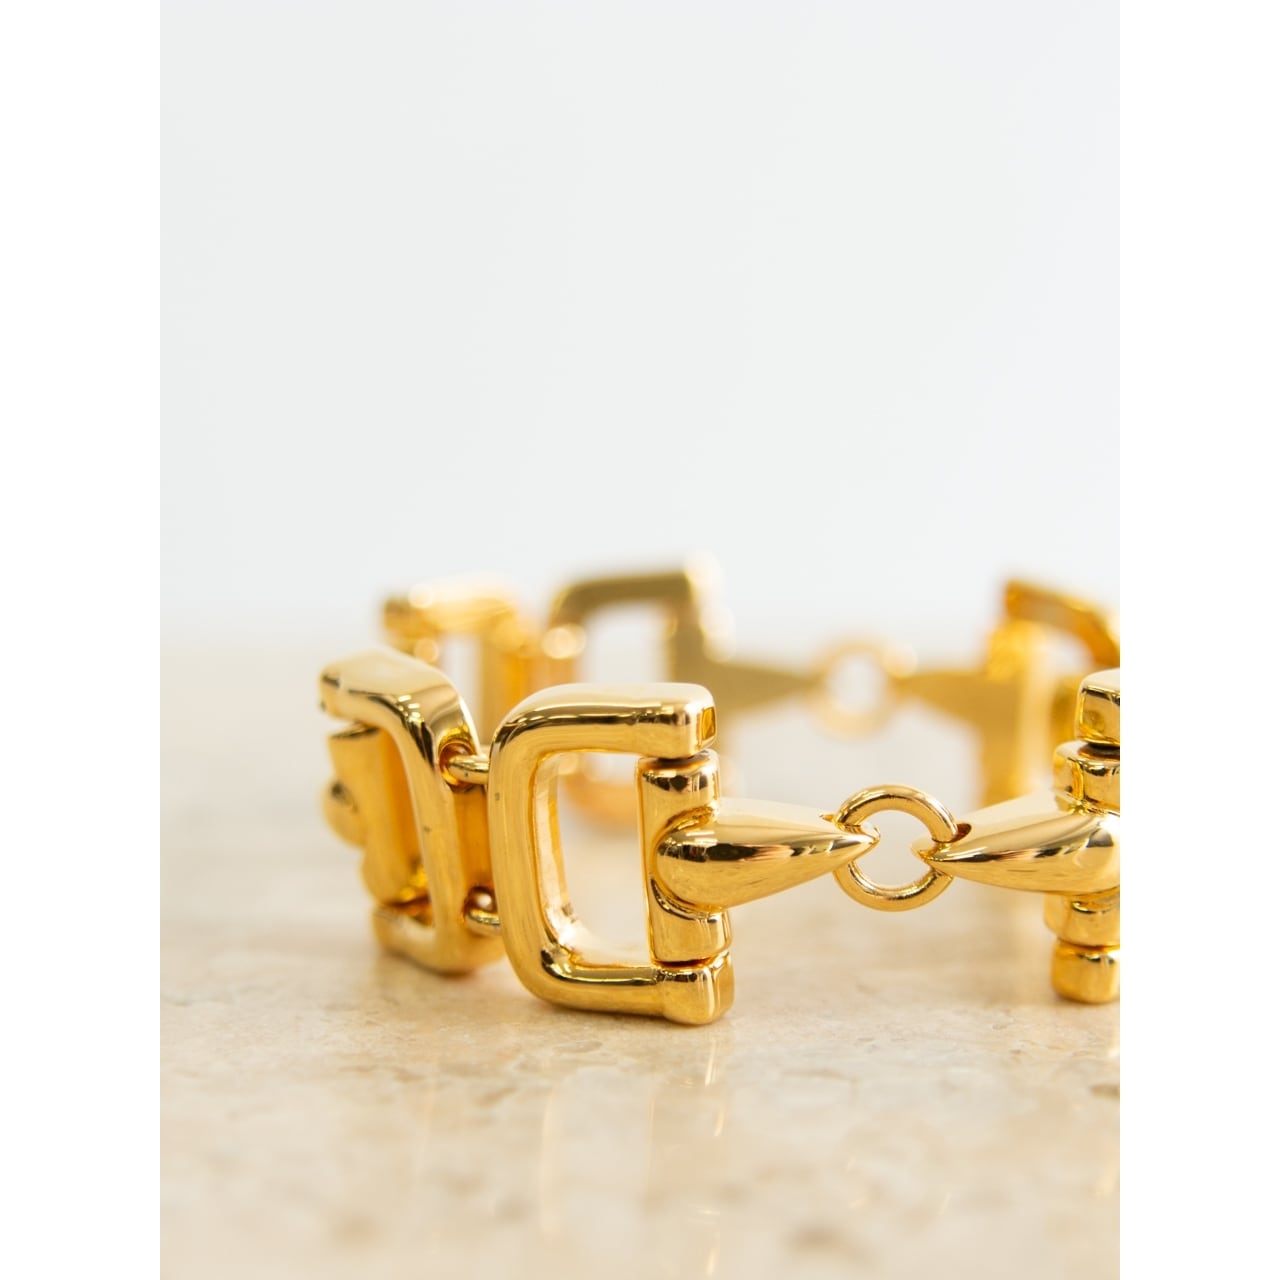 Gucci "Tom Ford"Made in Italy  Horsebit Gold Bracelet